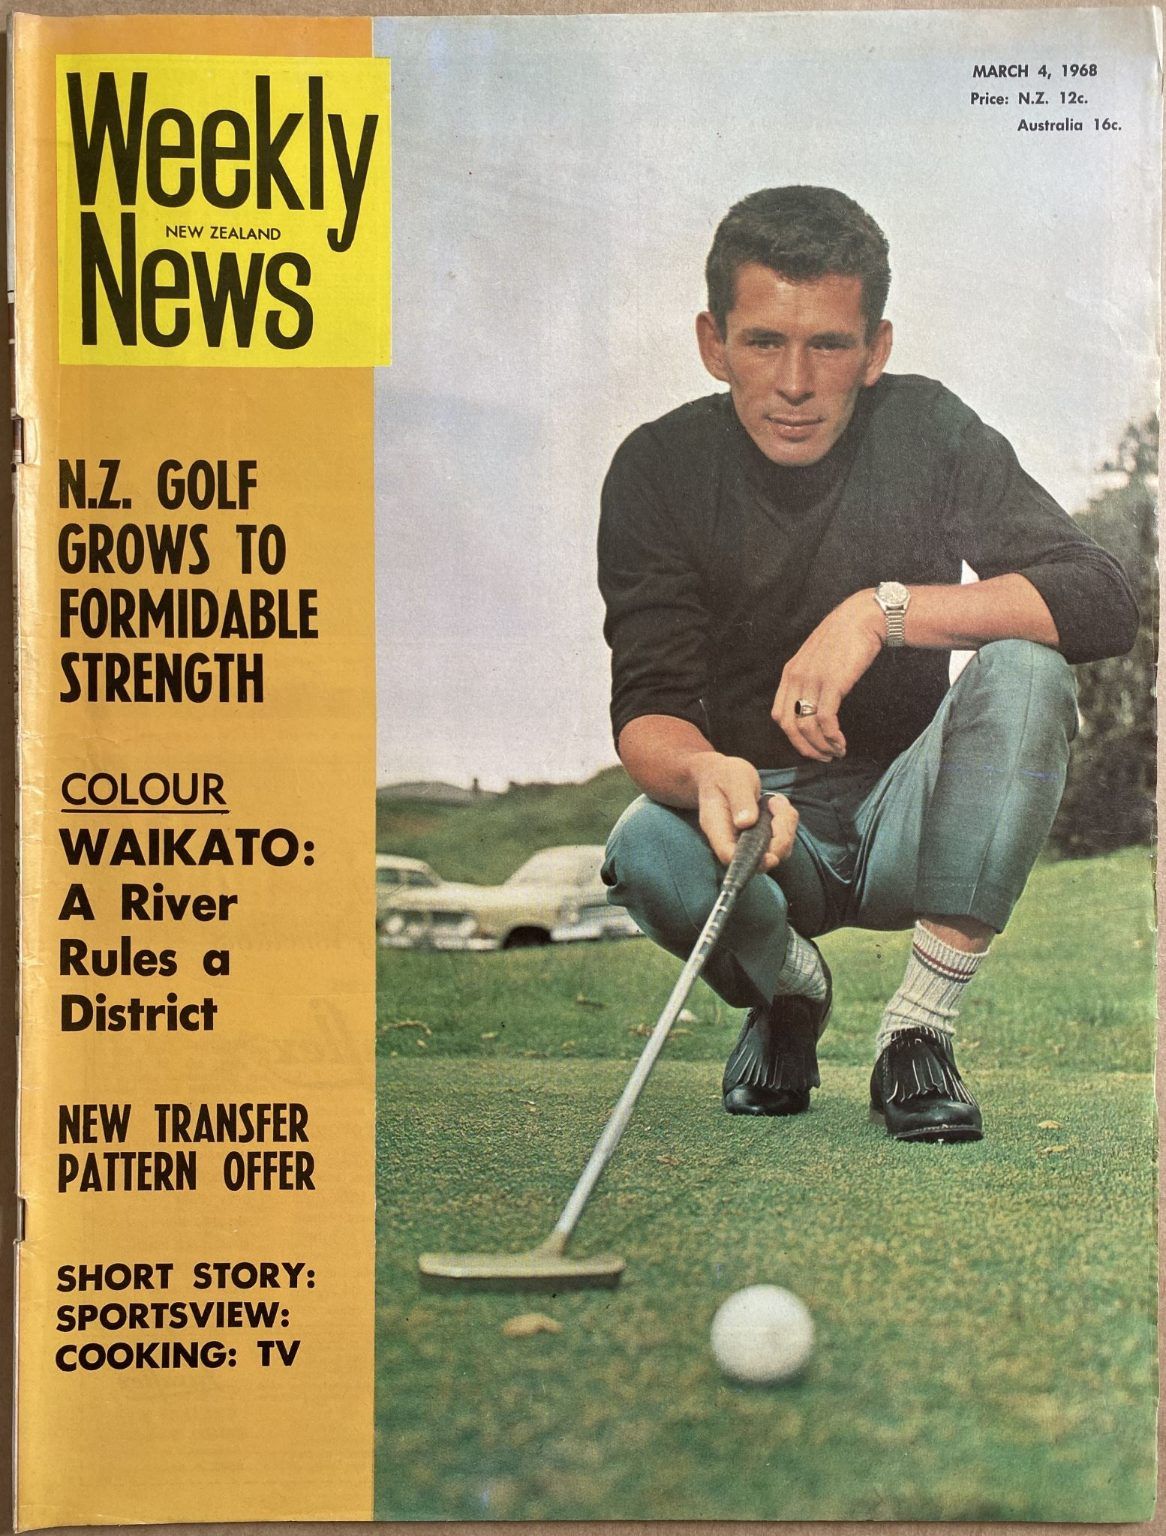 OLD NEWSPAPER: New Zealand Weekly News, No. 5440, 4 March 1968